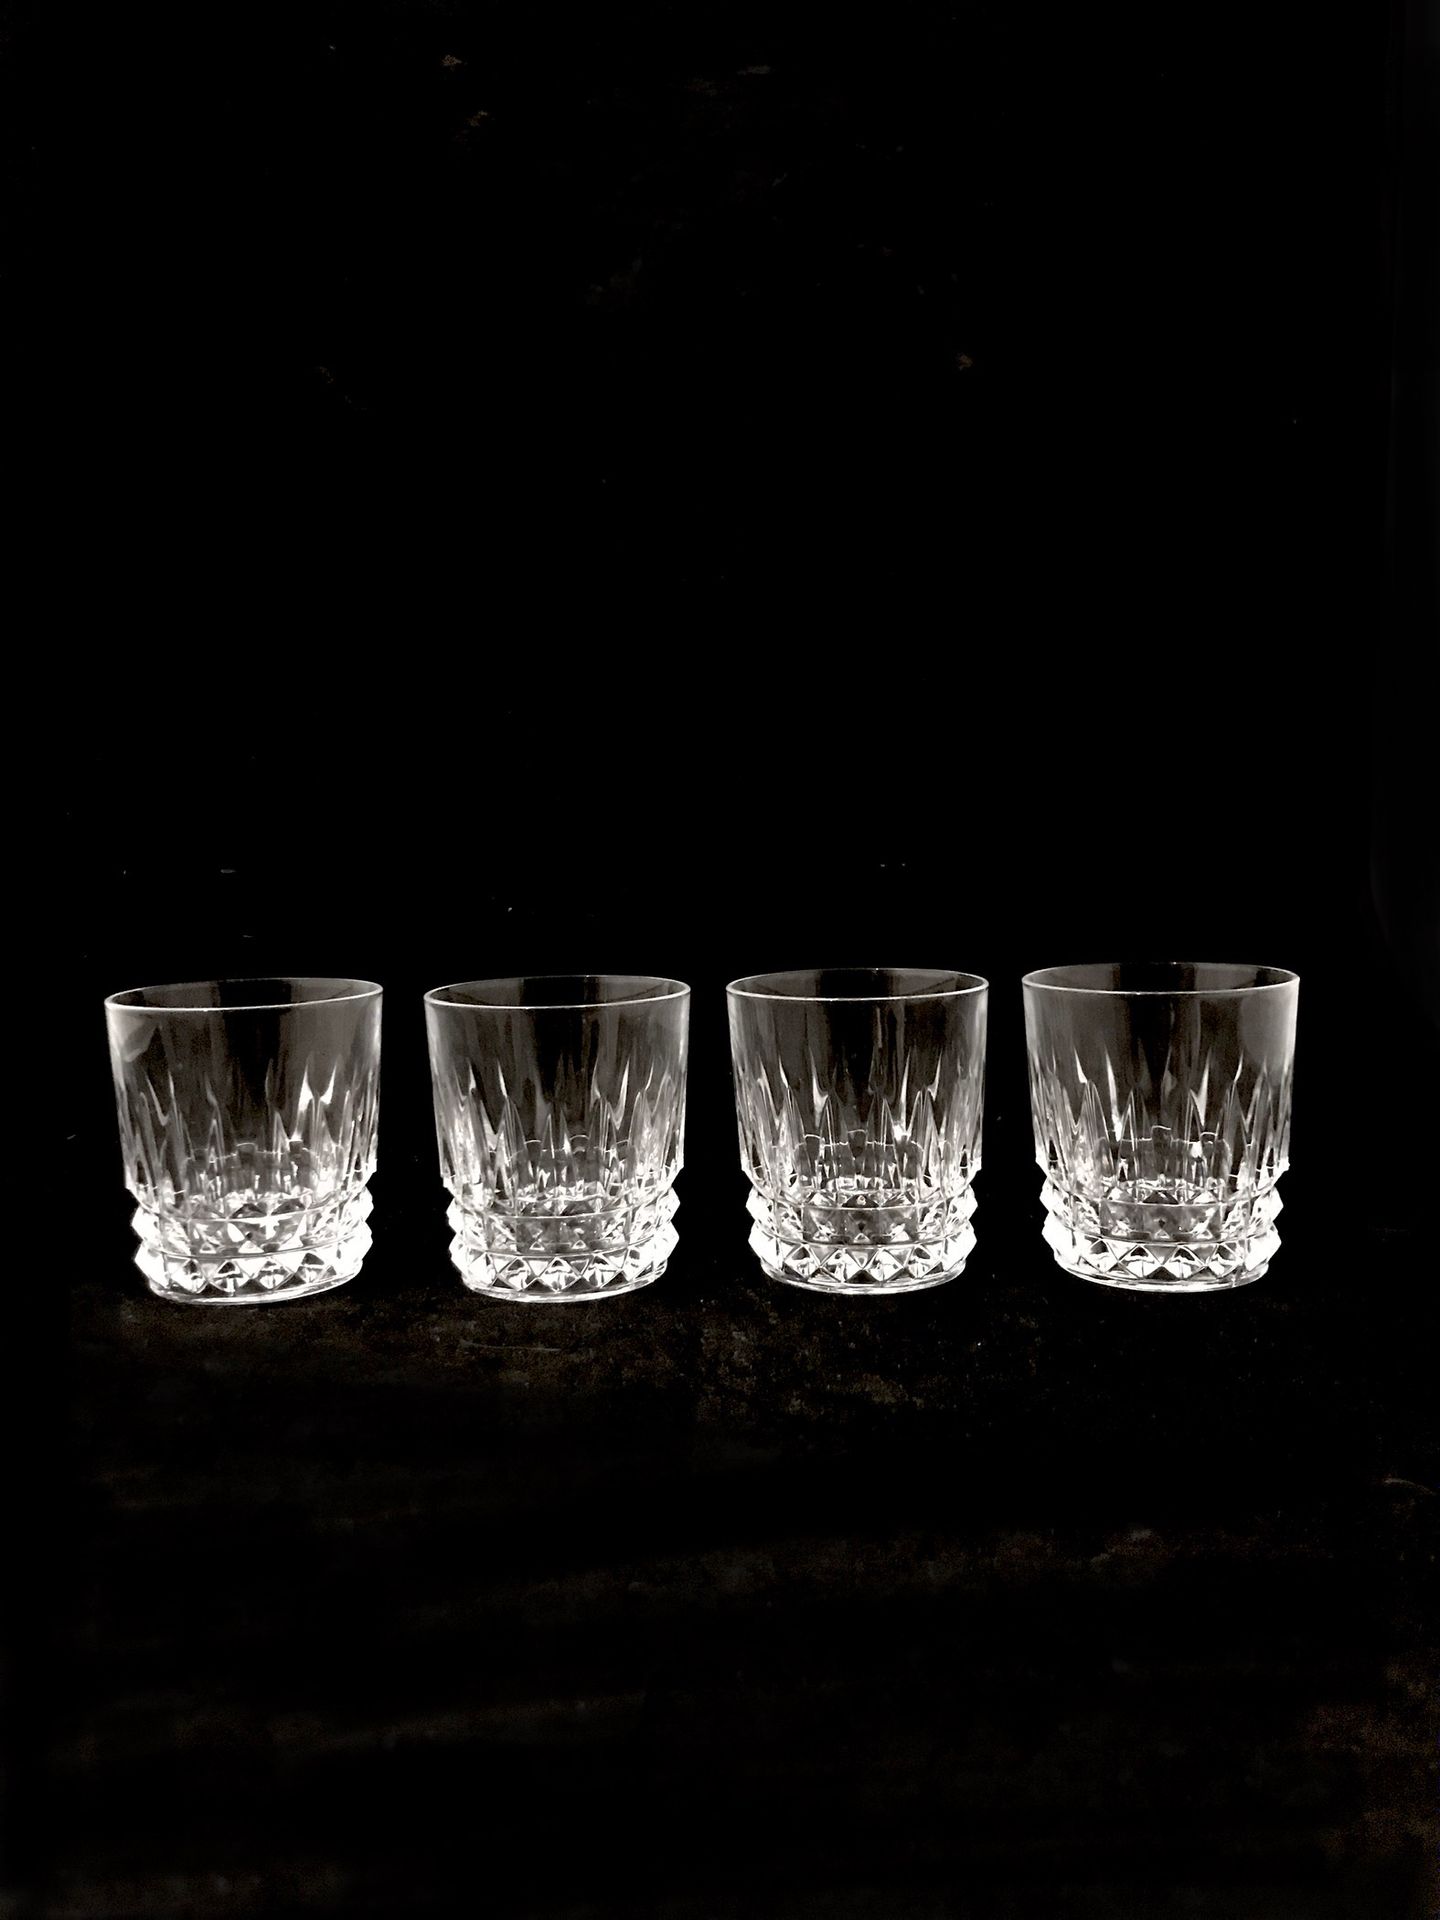 Null Suite of 12 moulded glass whisky glasses. One joined there 4 glasses to wis&hellip;